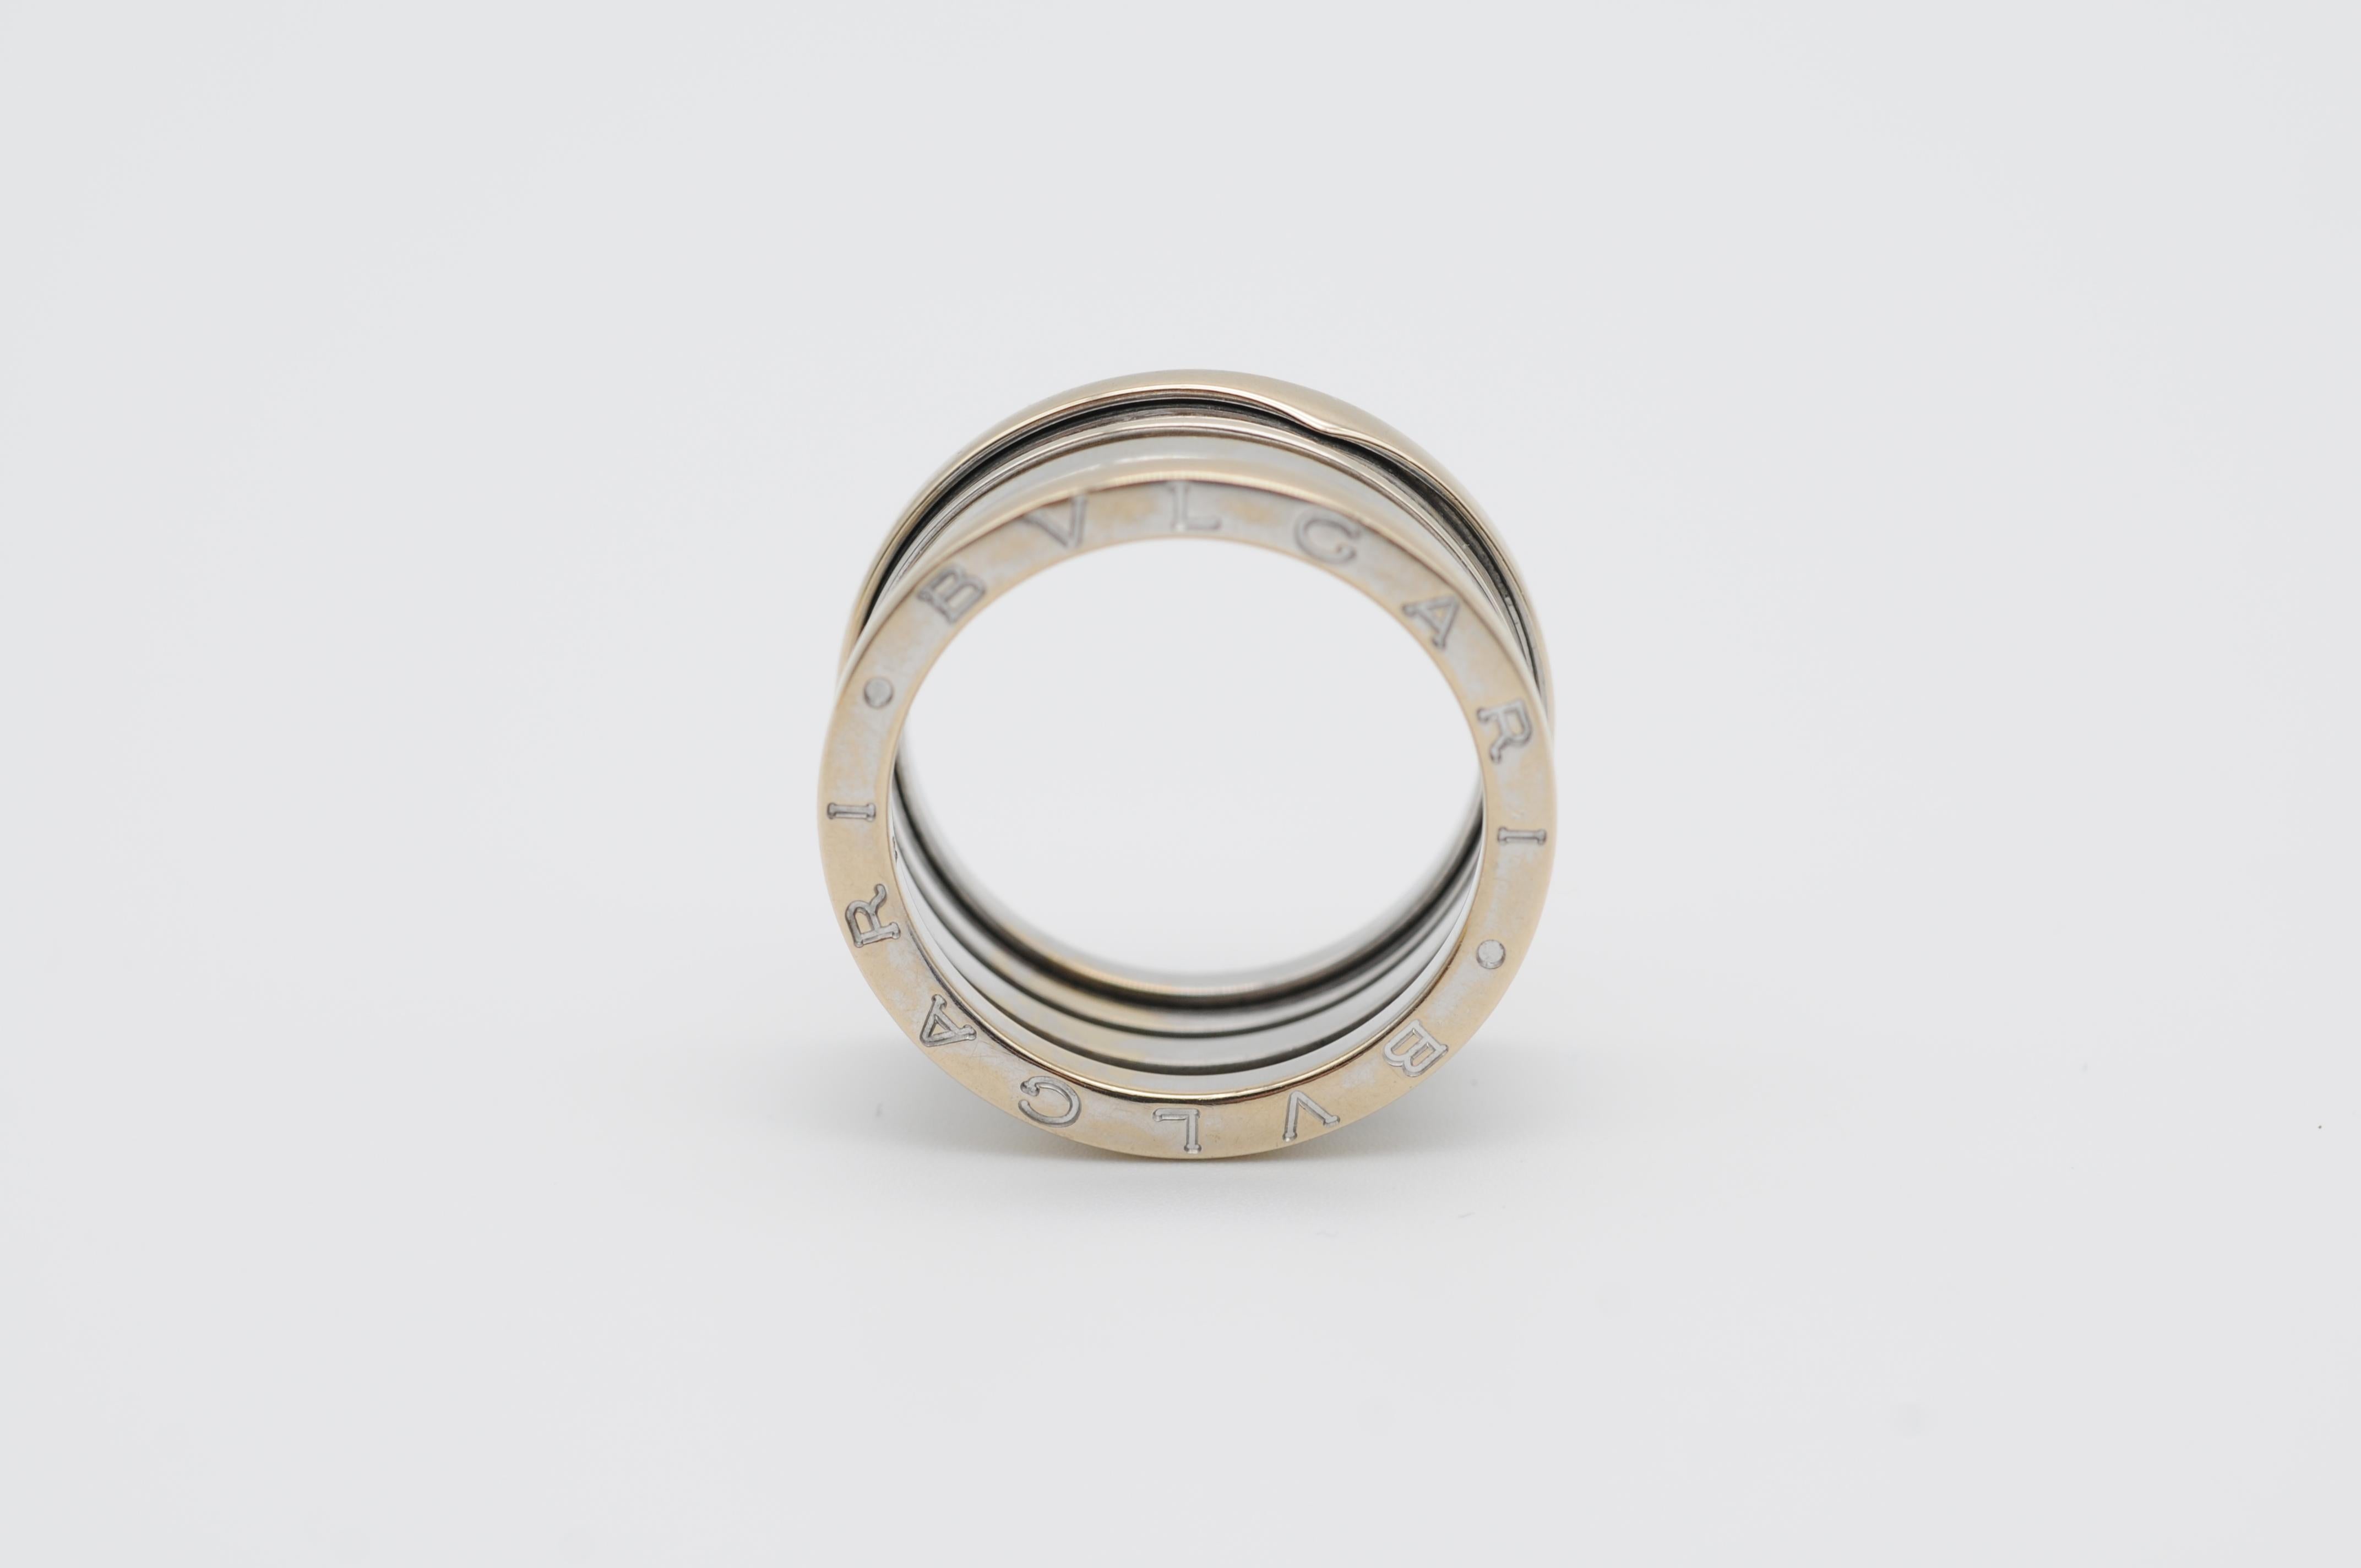 This stunning Bulgari B Zero Band Ring in 18K White Gold is a true masterpiece of luxury and elegance. The simple yet sophisticated design of this ring is a testament to the renowned craftsmanship of the Bulgari brand. The white gold band is smooth